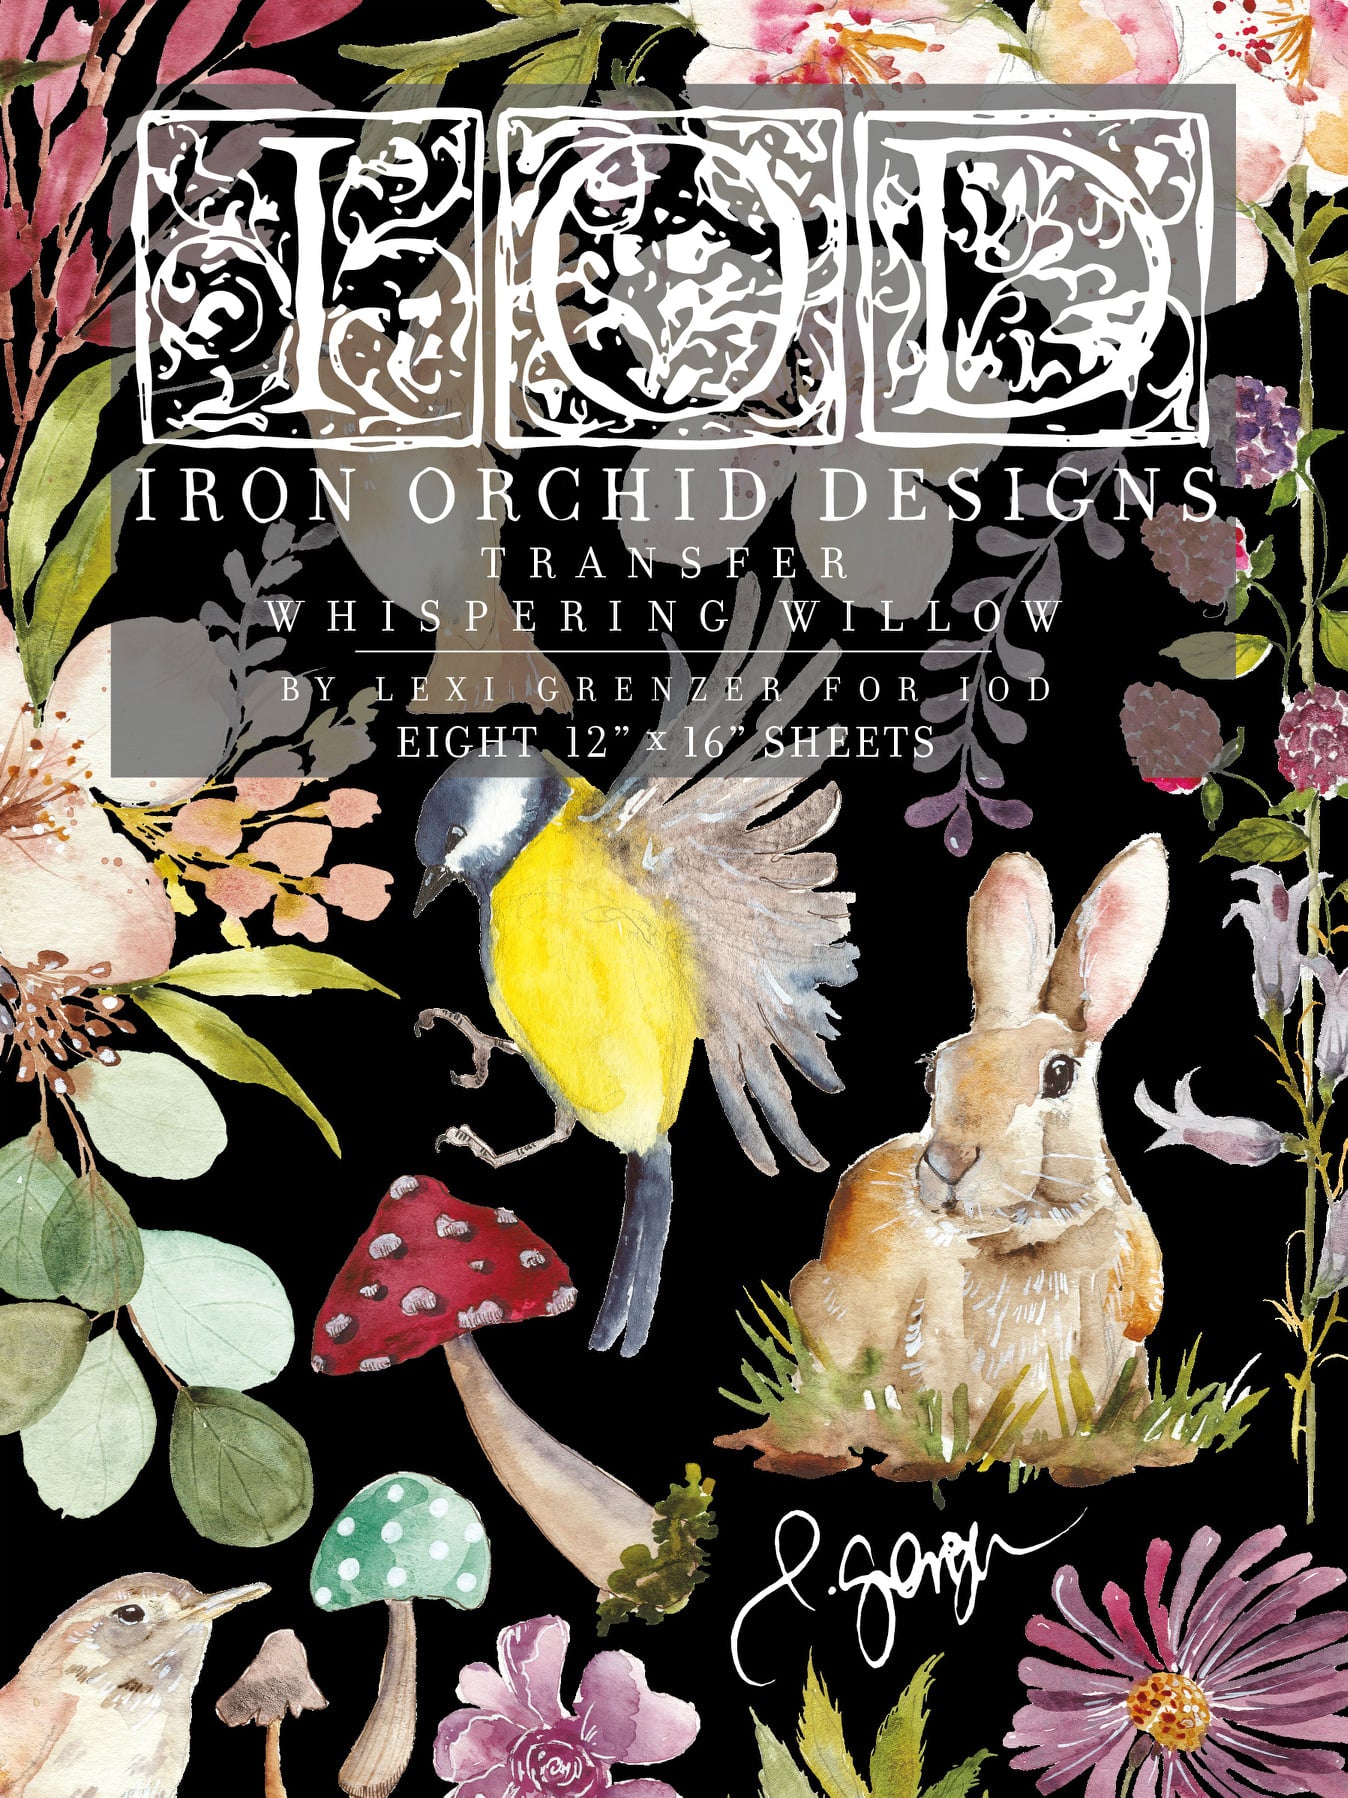 Iron Orchid Design | Transfer | Whispering Willow